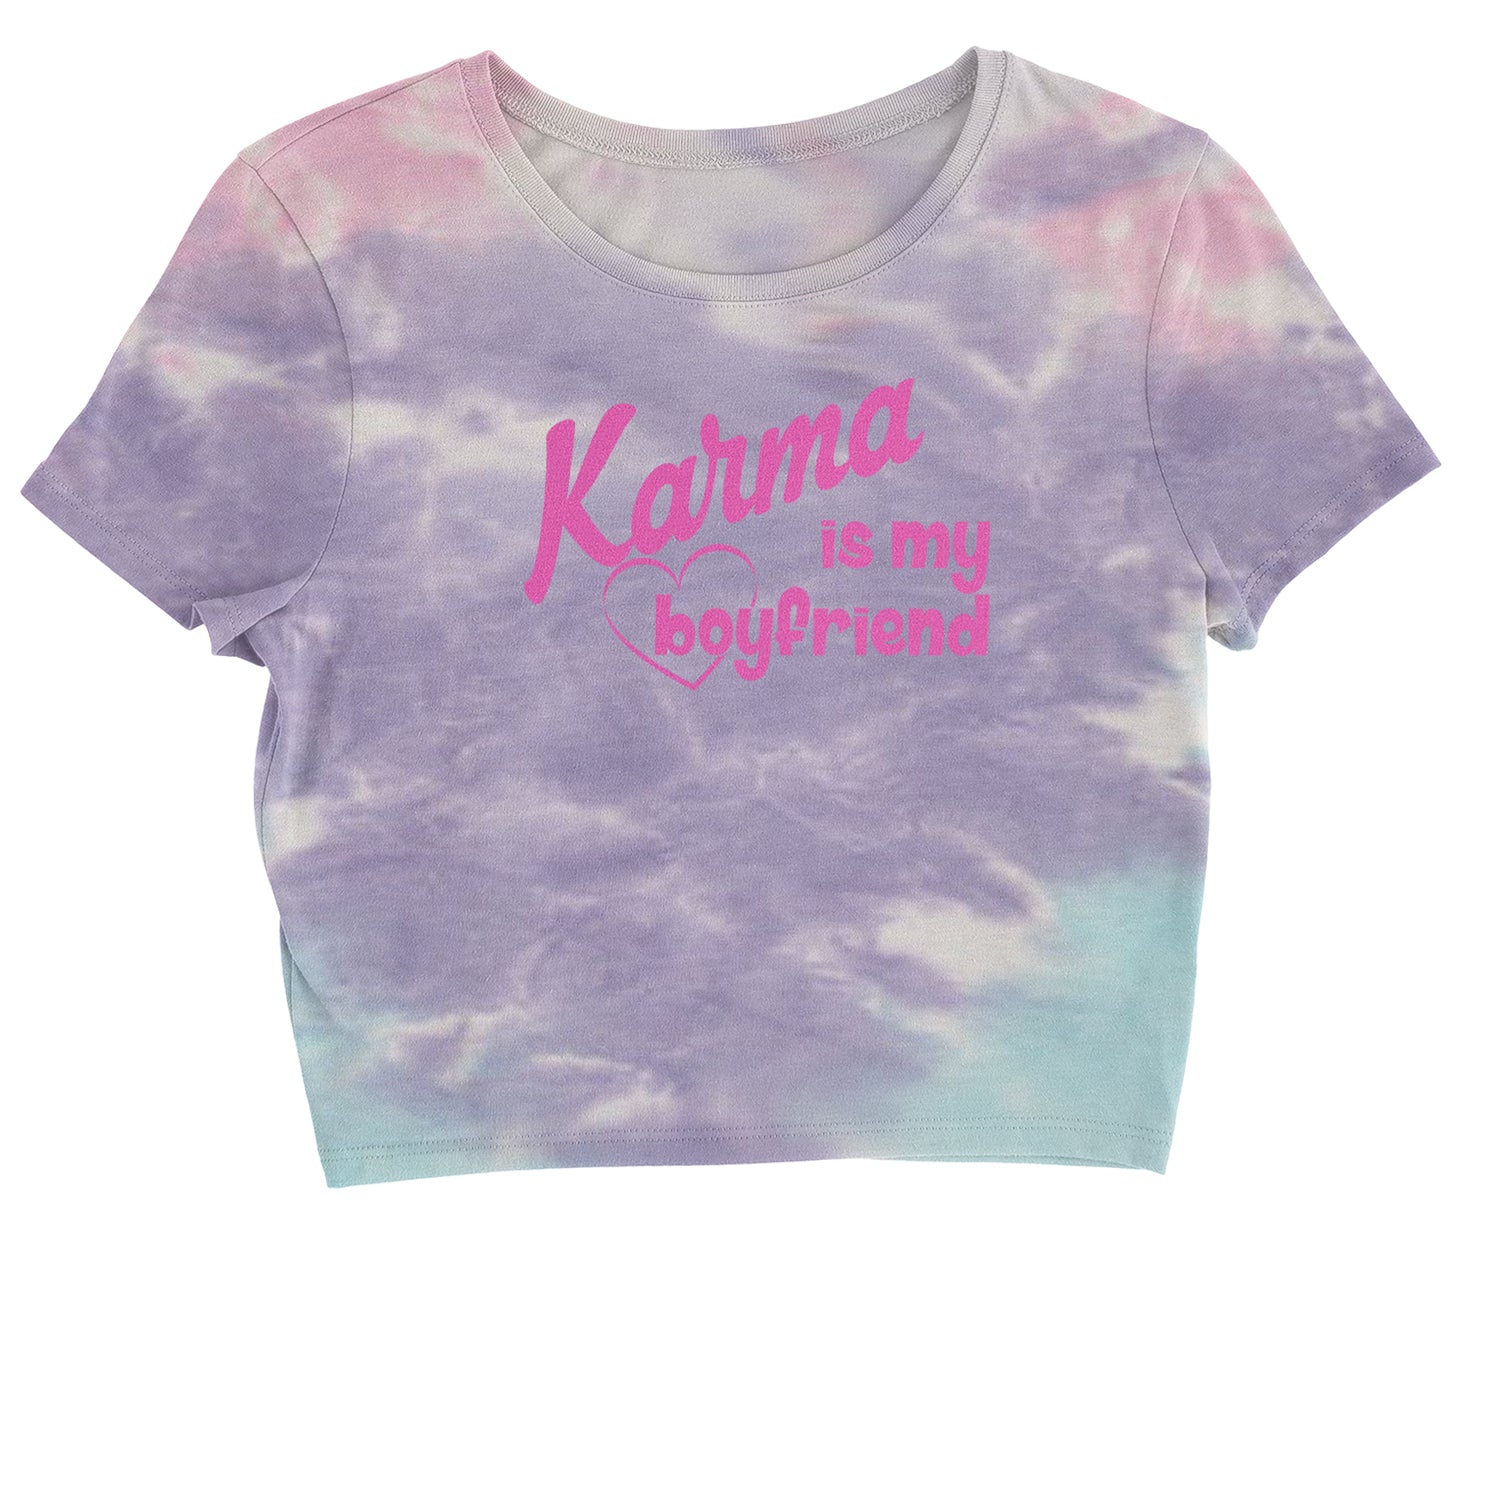 Karma Is My Boyfriend Cropped T-Shirt nation, taylornation by Expression Tees